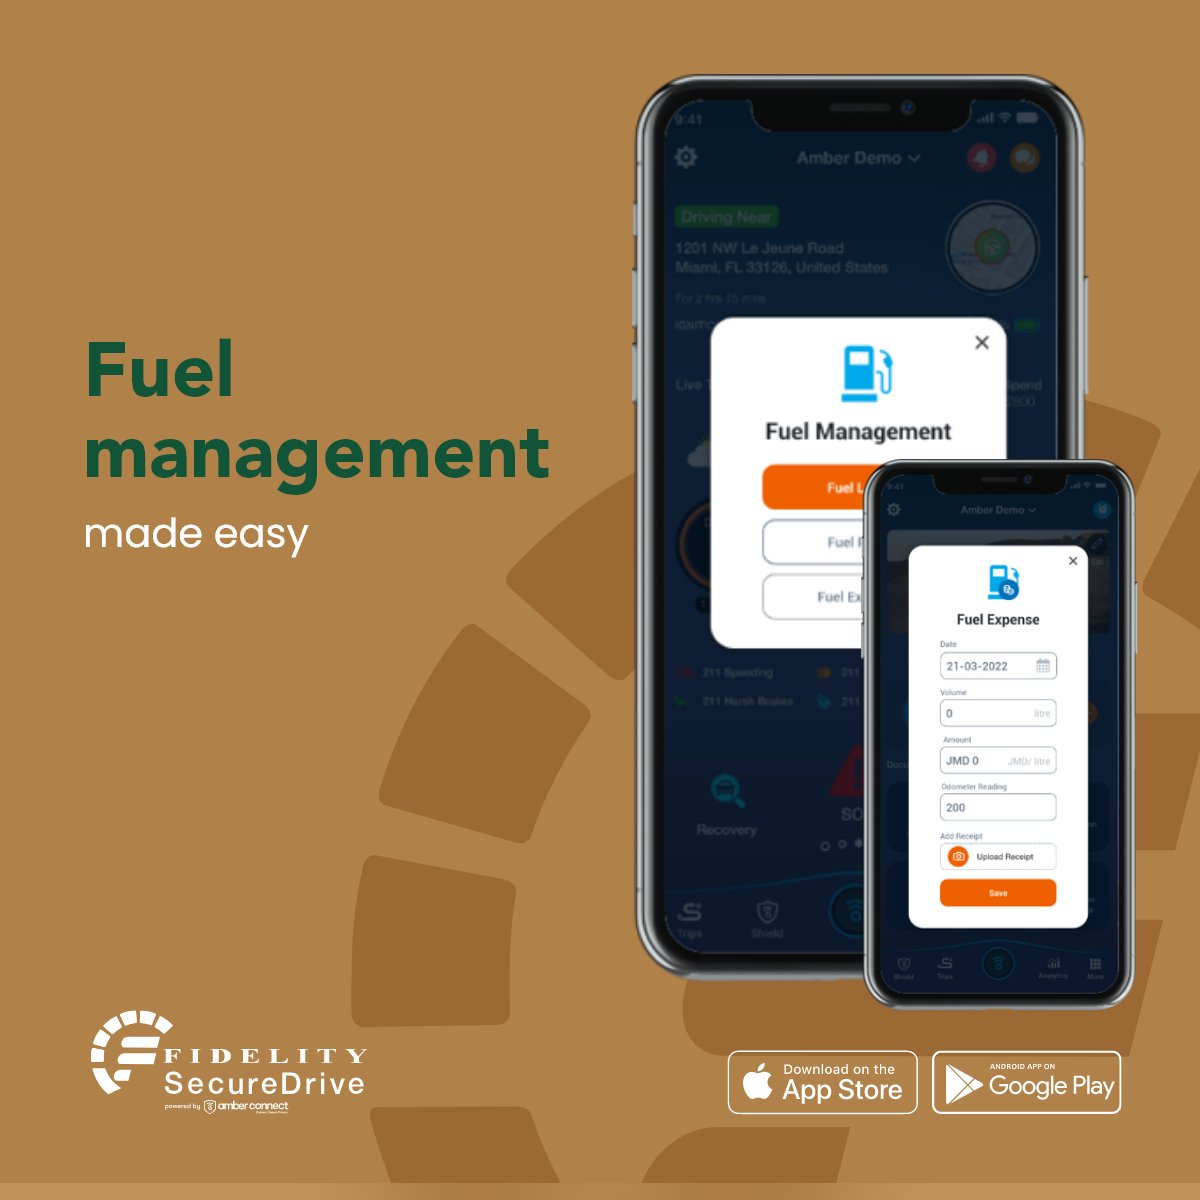 We can’t control the fuel price - but we can help you manage your fleet’s fuel consumption.

#FidelitySecureDrive #VehicleTracking #YourDrivingCompanion